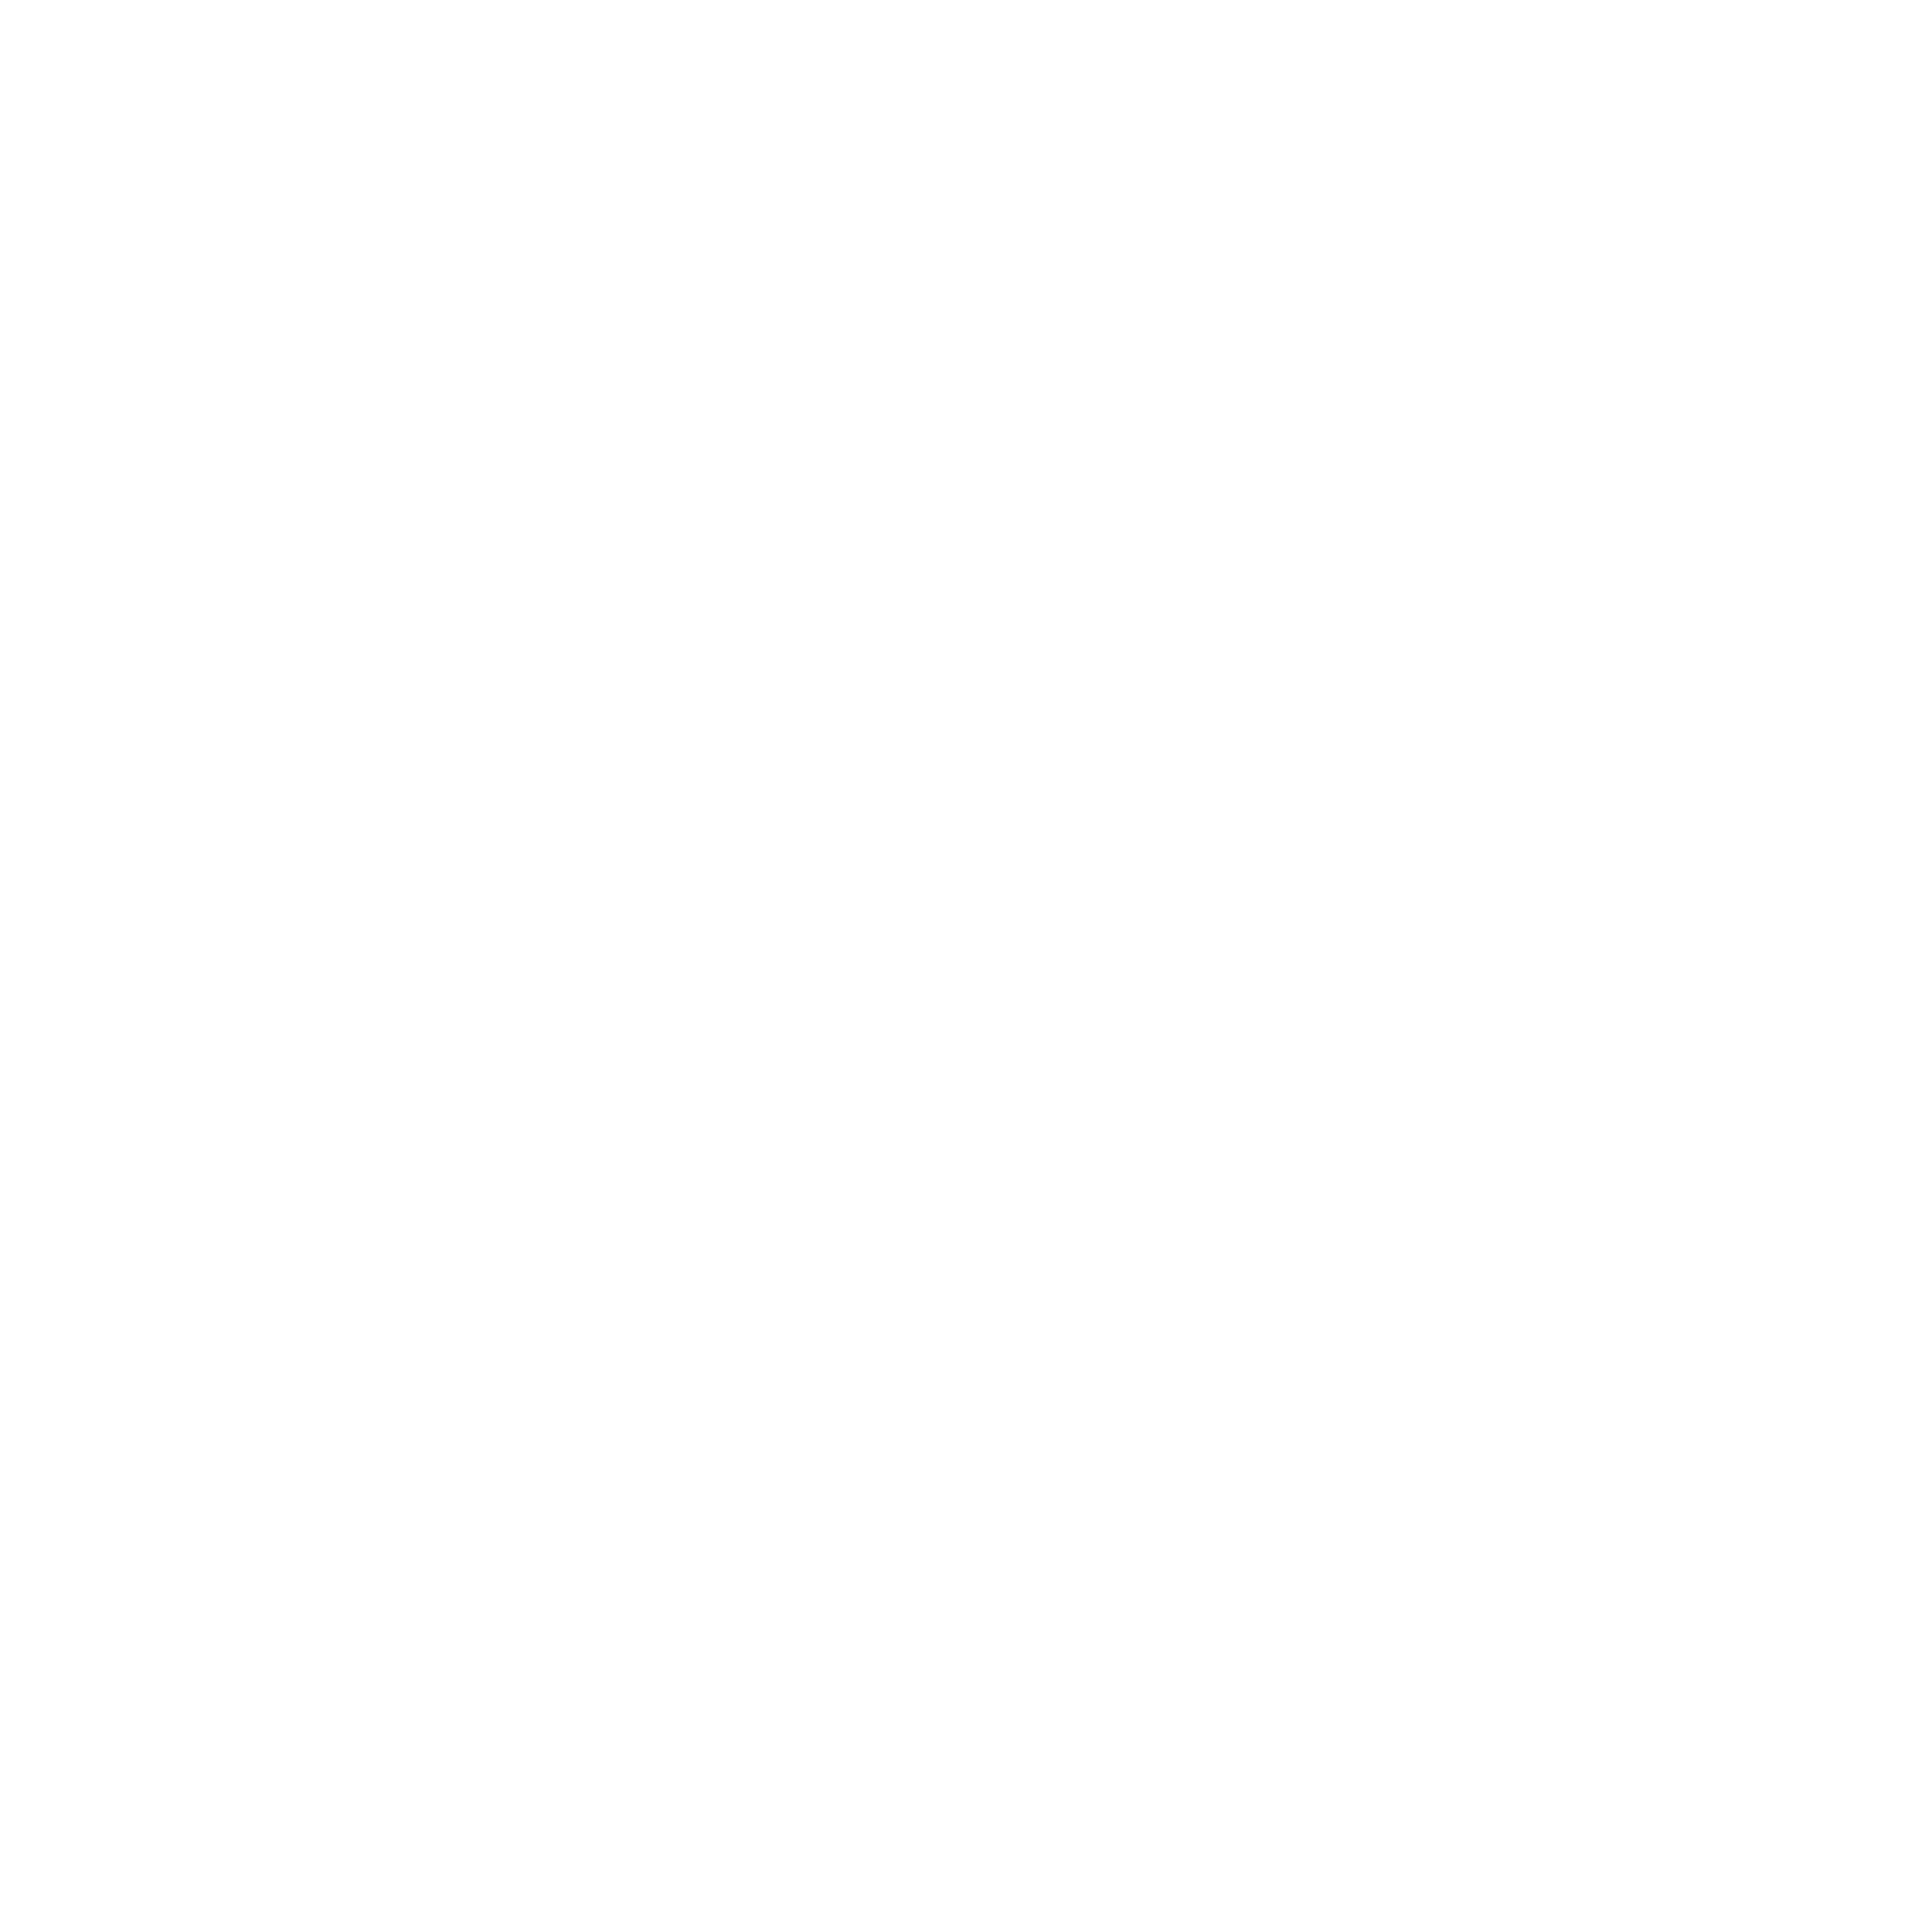 SATIN TOPLESS INDUSTRY